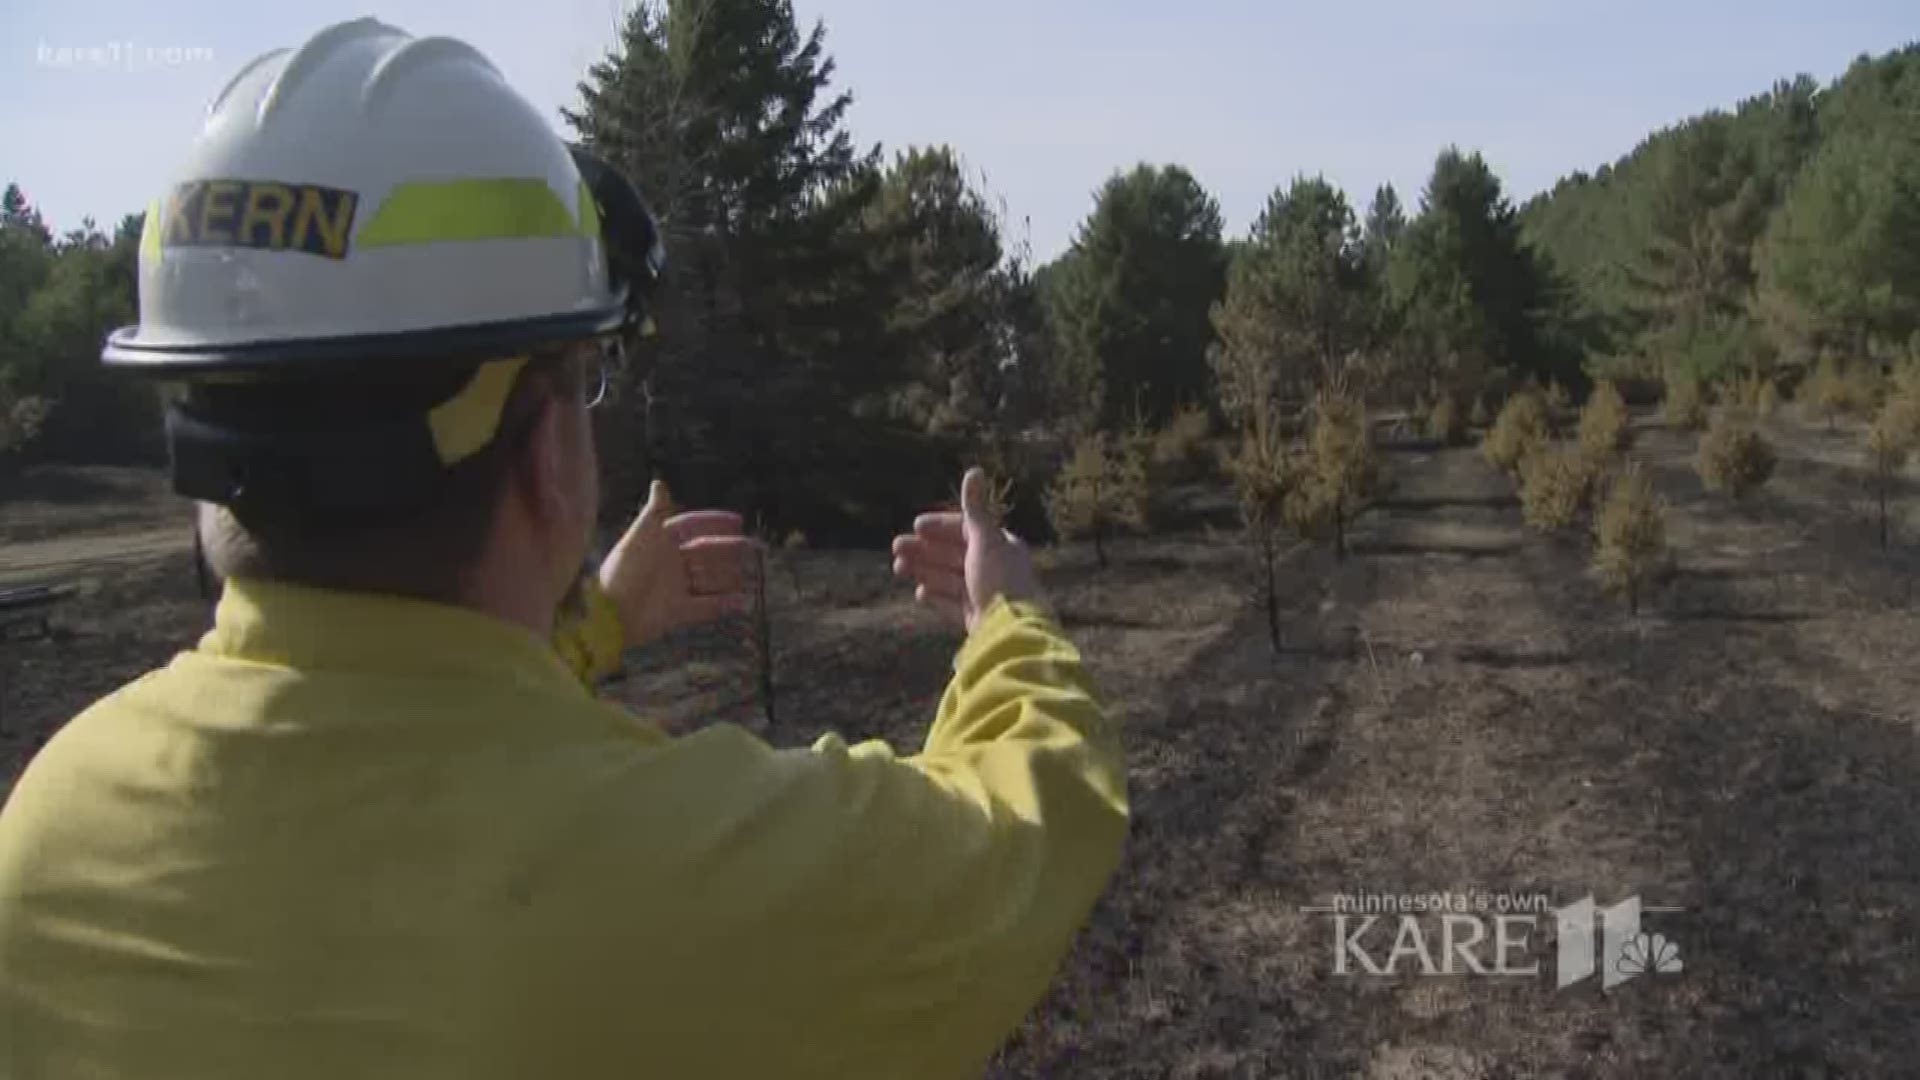 DNR forestry firefighters in Little Falls had to land its air tankers and helicopters midway through a rural wildfire, because a drone flew into their airspace, creating a safety hazard. https://kare11.tv/2w34b7A